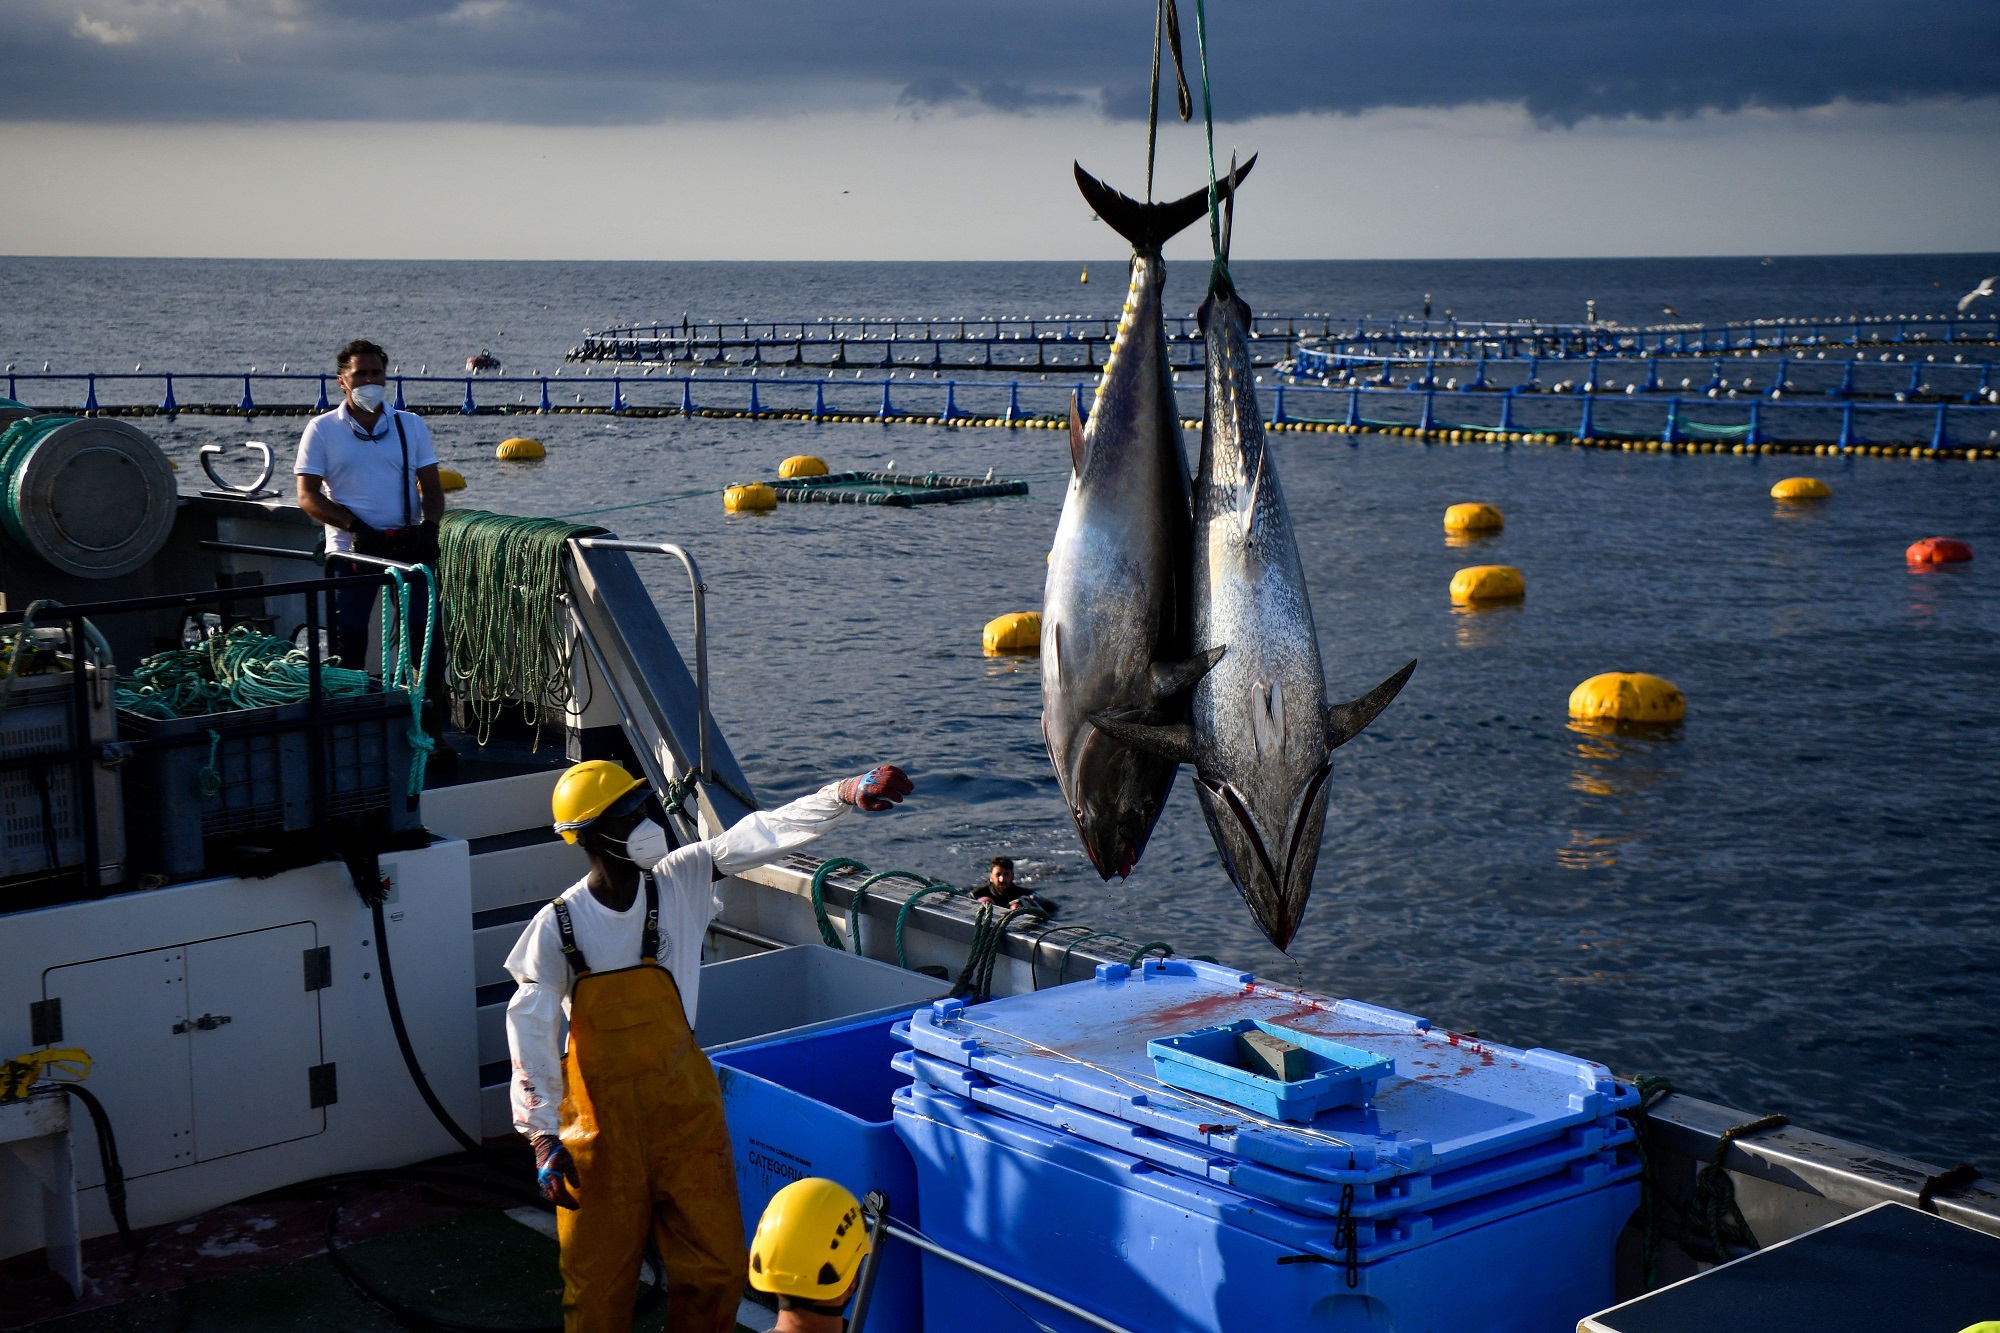 Pair of bluefin tuna strung up on a fishing crane on the coast of Spain